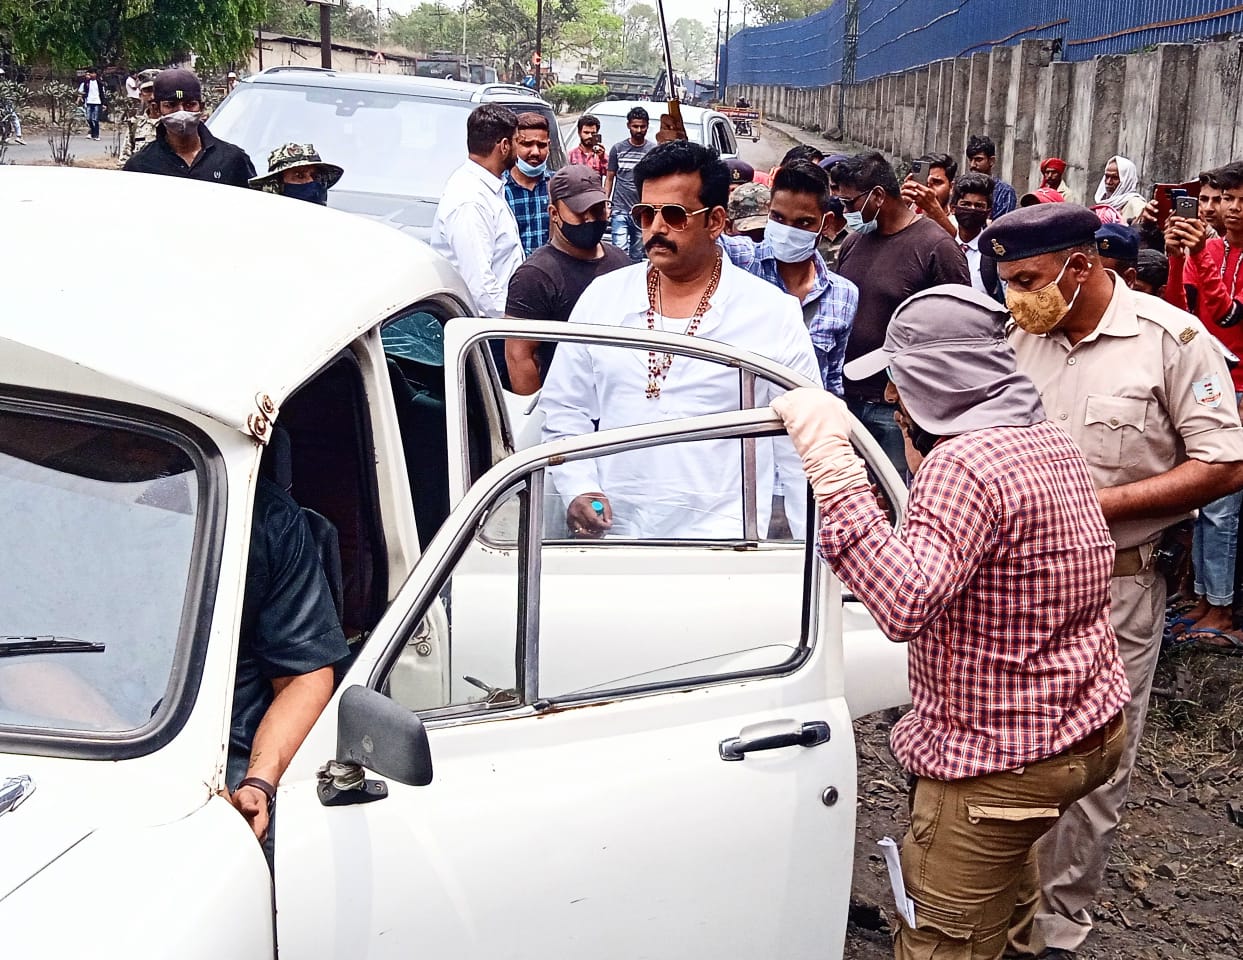 team of film varchasv became helpless RPF stopped actor Ravi Kishan from shooting in ramgarh without permission